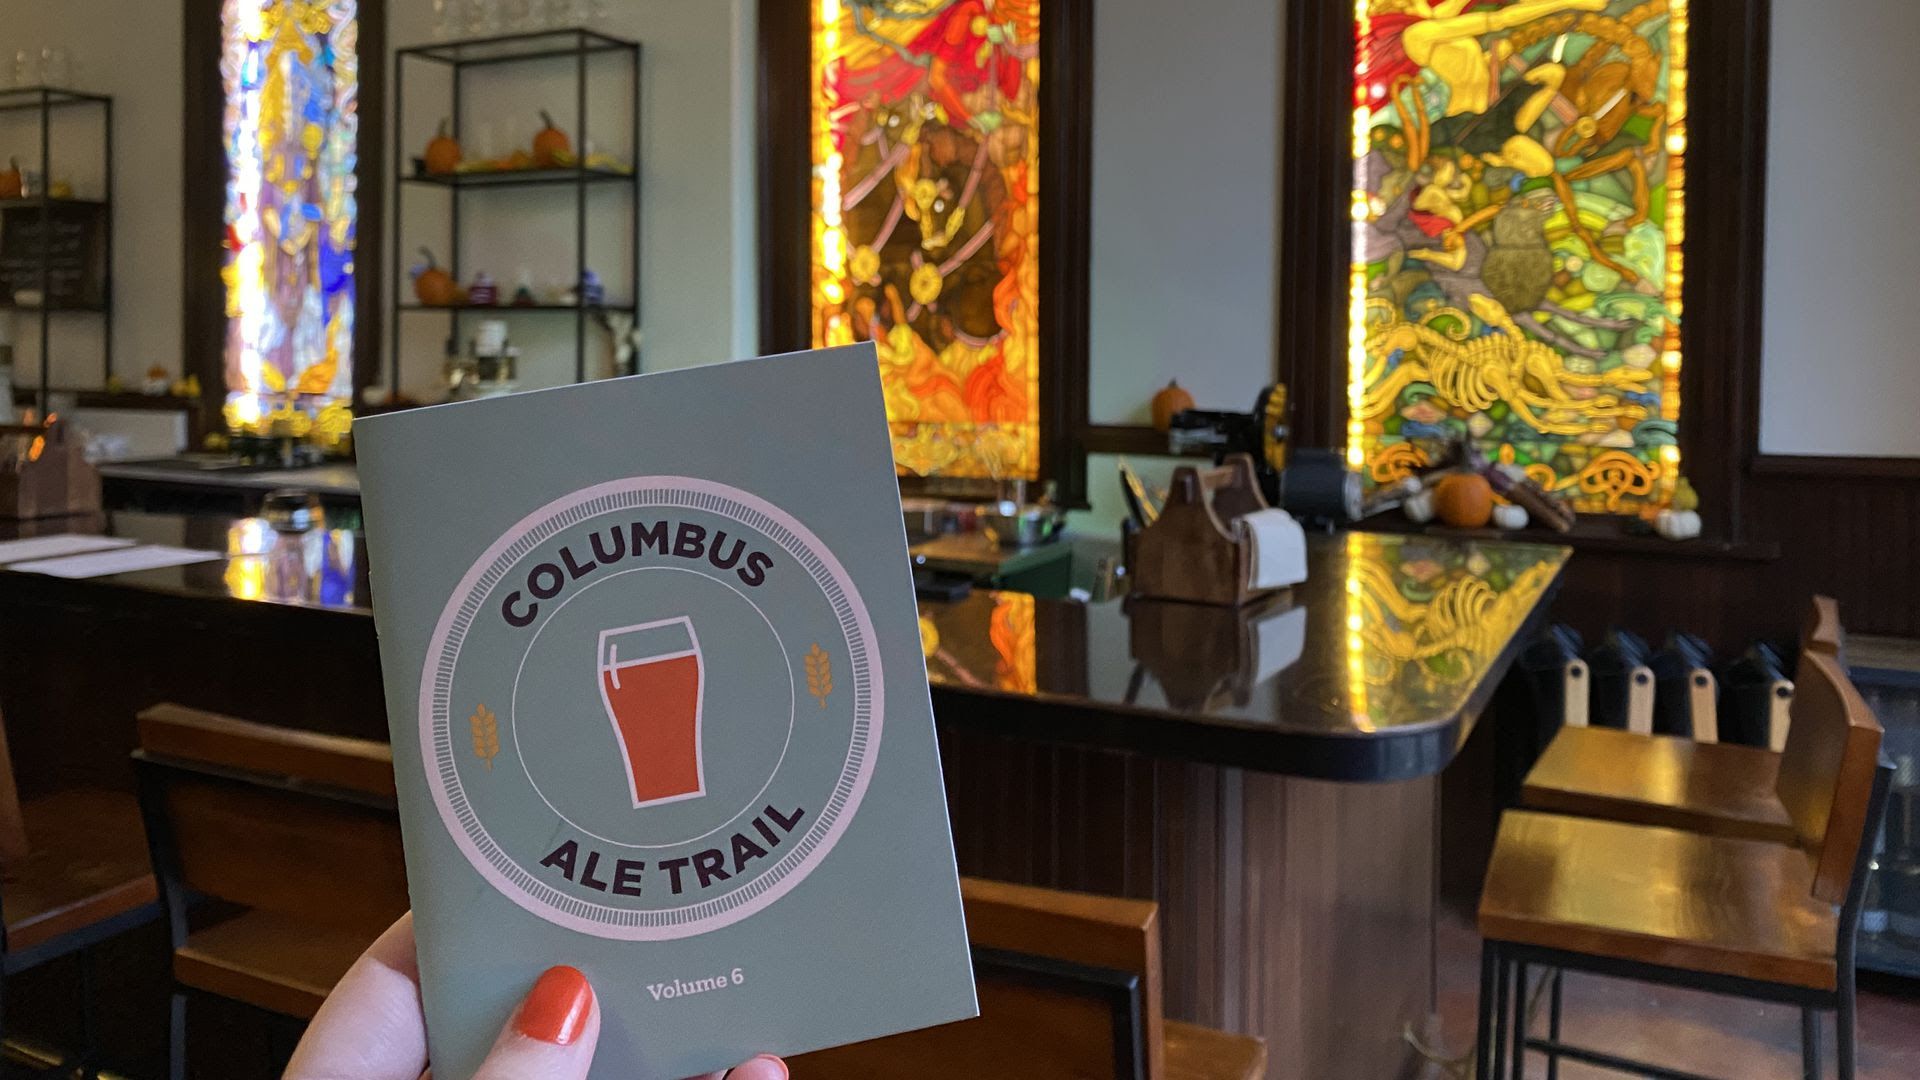 The stained-glass windows behind the bar at Gemüt Biergarten are the perfect backdrop for the Columbus Ale Trail book